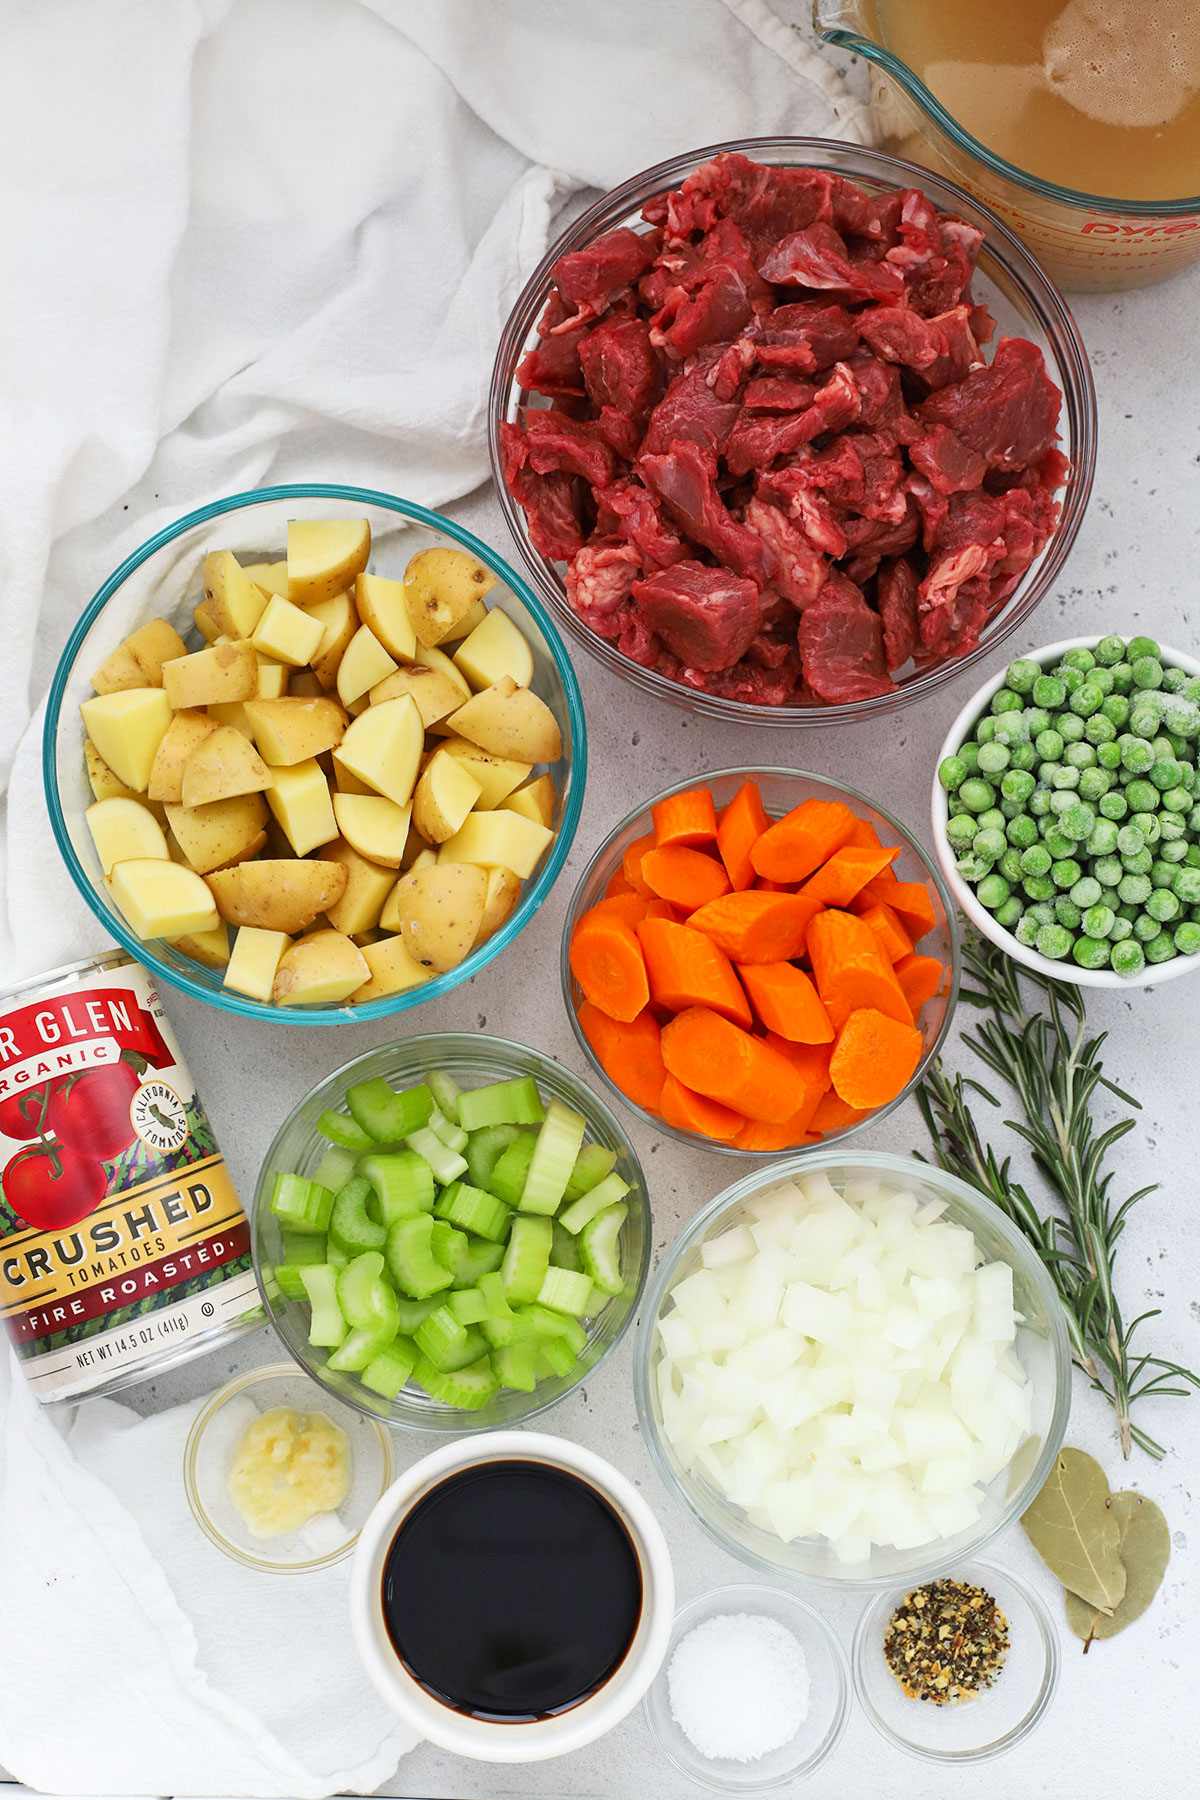 Ingredients for gluten-free beef stew in small glass and white bowls